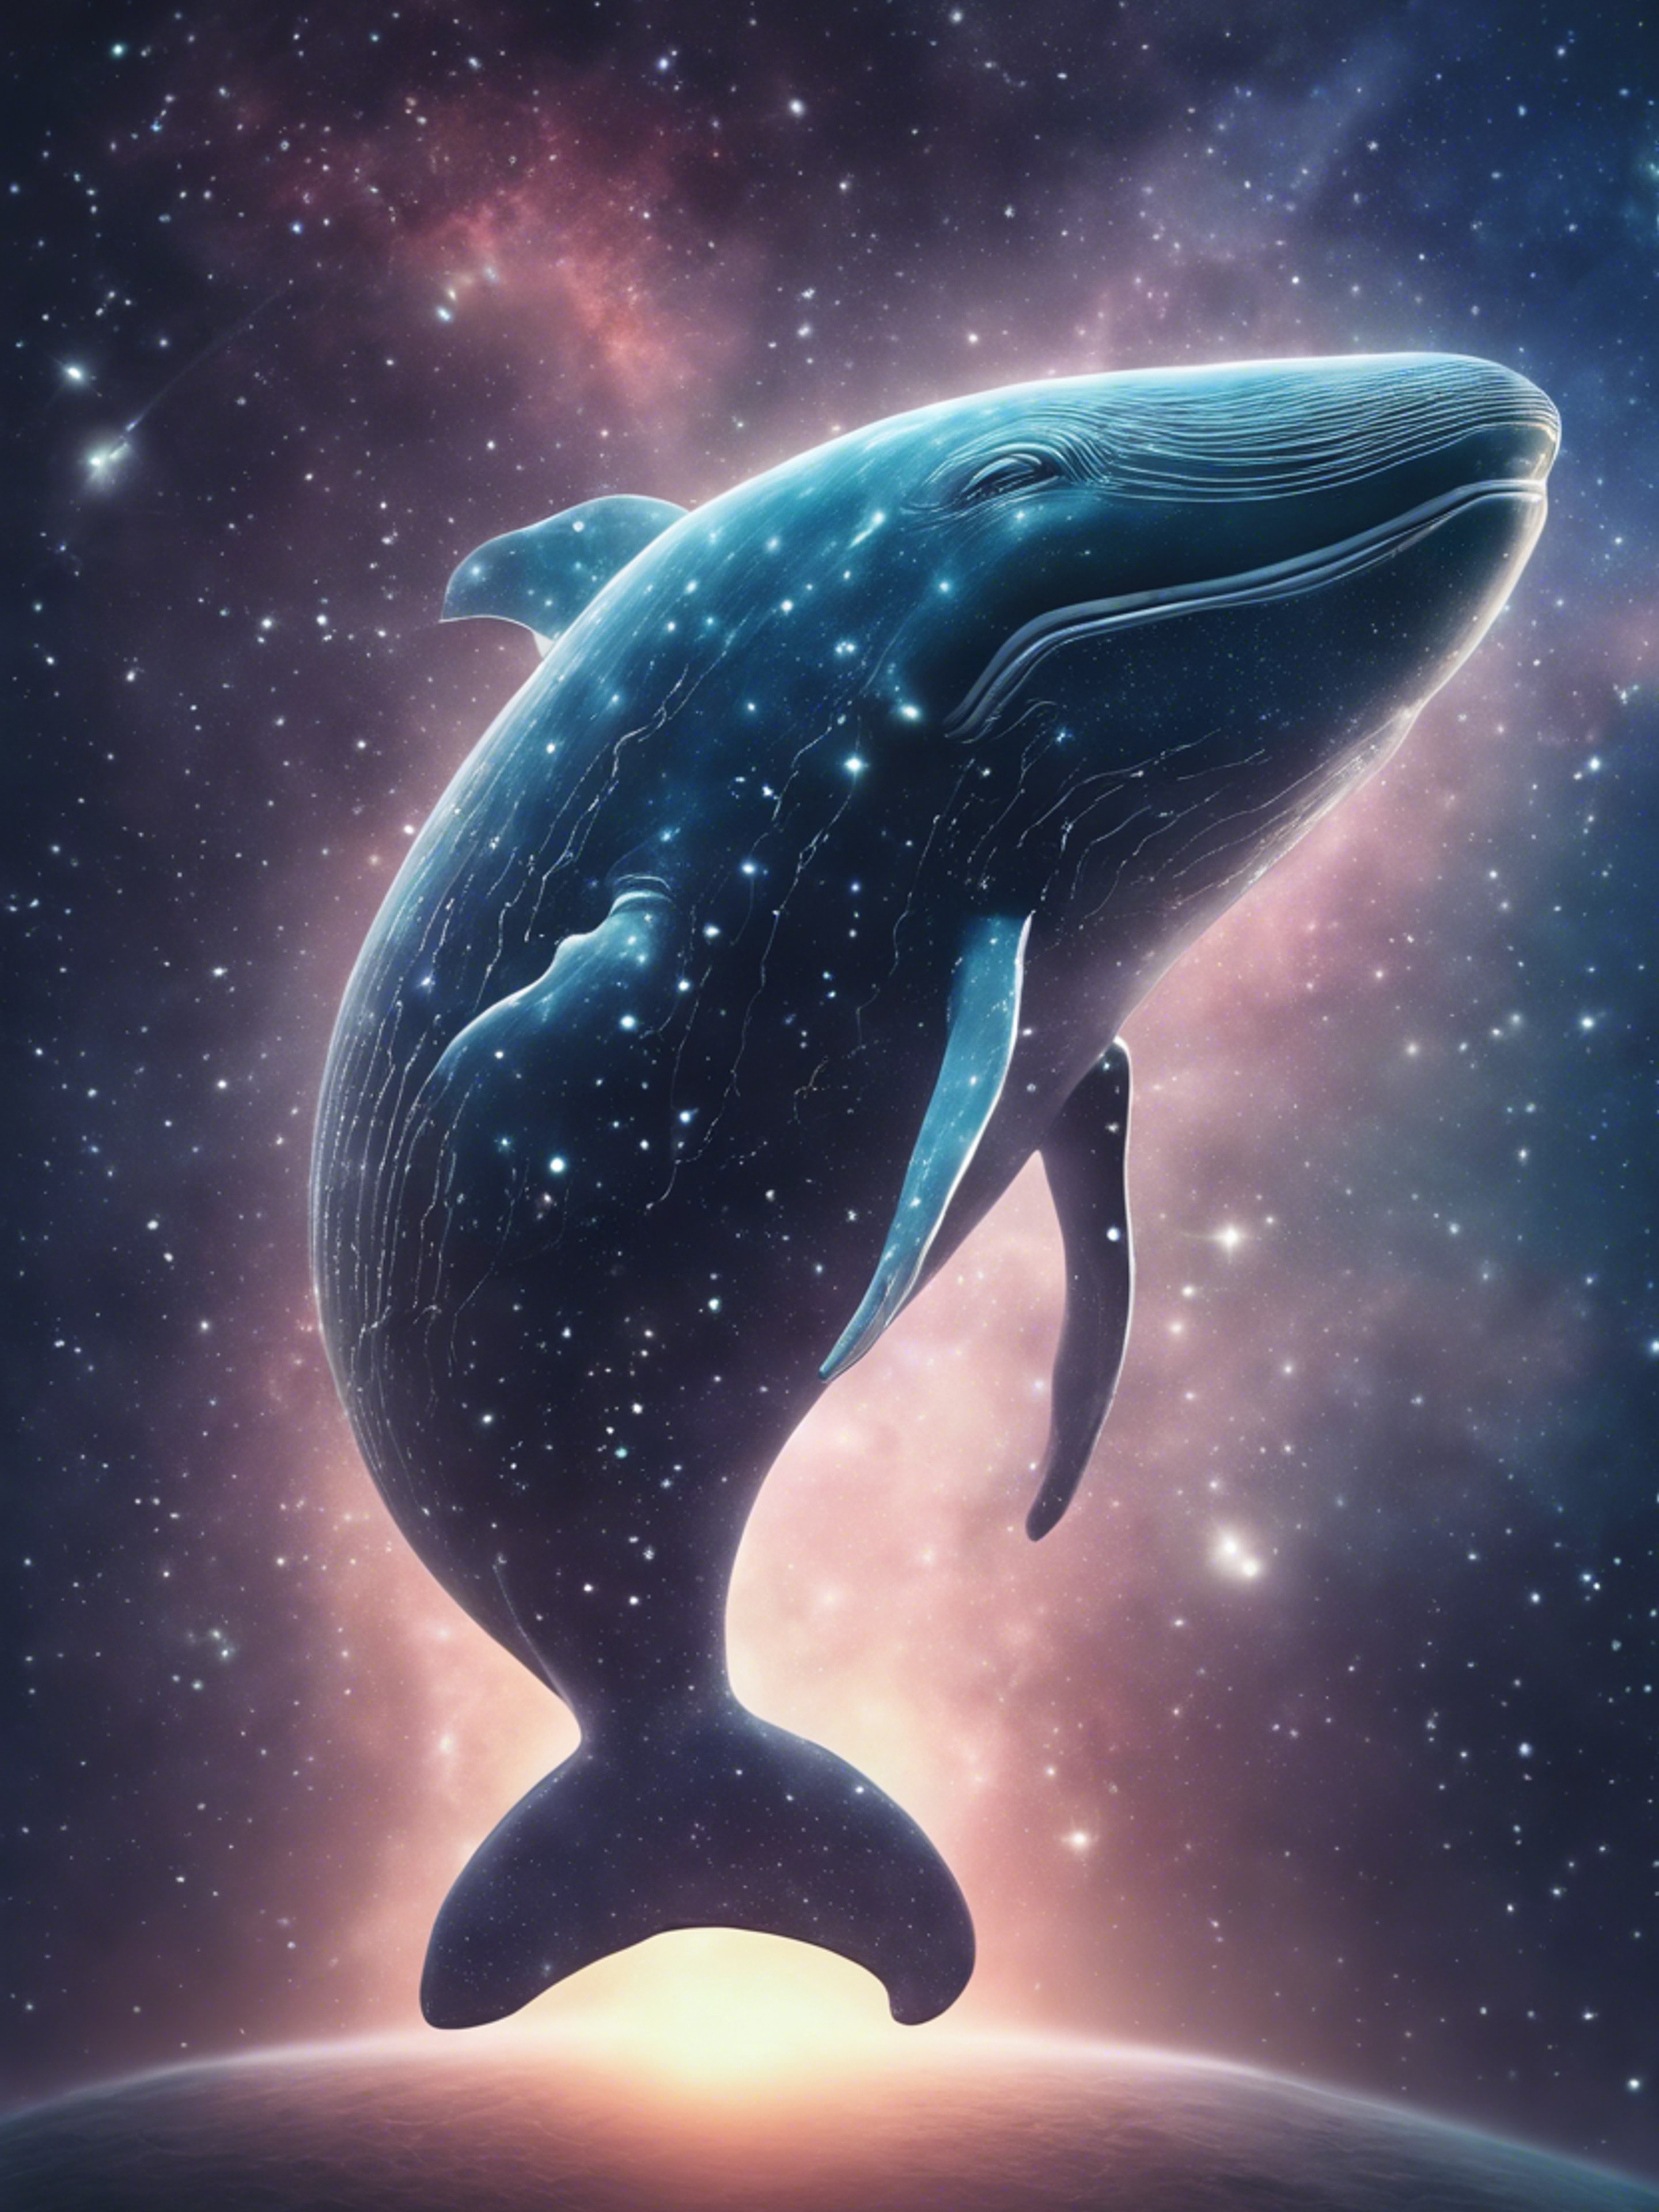 The ethereal vision of a translucent ghost whale, drifting solemnly in outer space amidst stars and galaxies. Wallpaper[2bf522f4d87b43c8a67e]